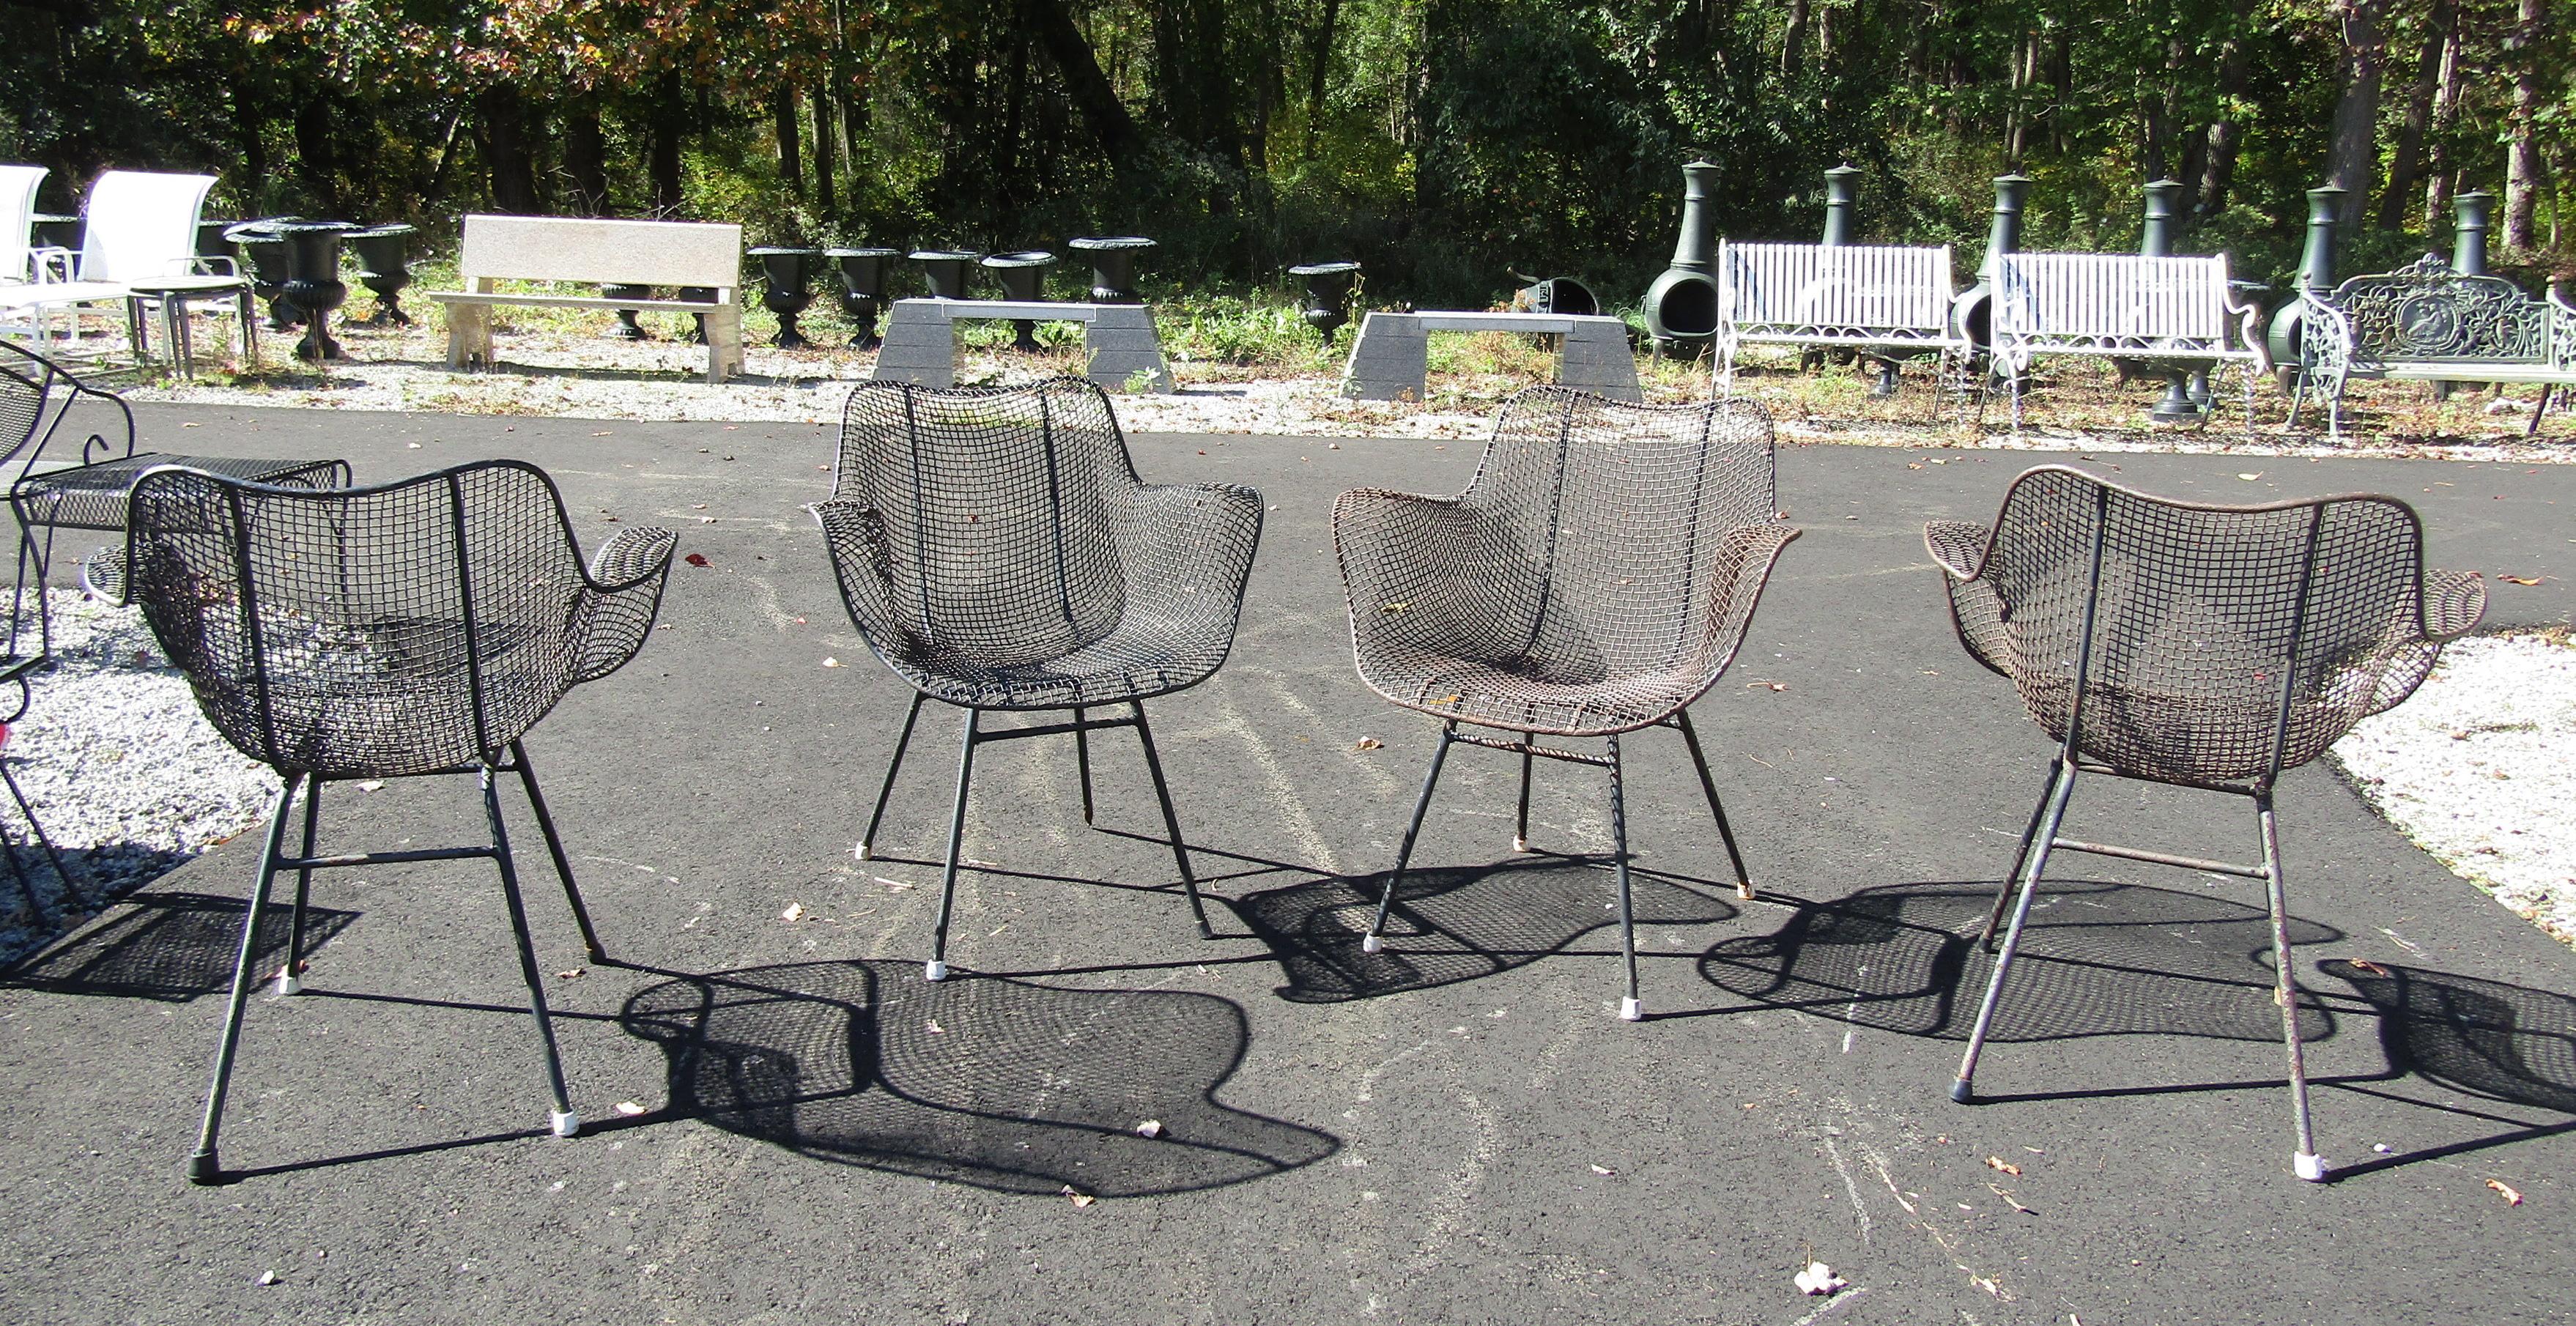 This vintage modern patio set includes a serving cart, and four Russel Woodard Sculptura chairs. The wonderful mesh design ensures maximum comfort without sacrificing style. Convenient serving cart with a removable tray. Great 1960s set with